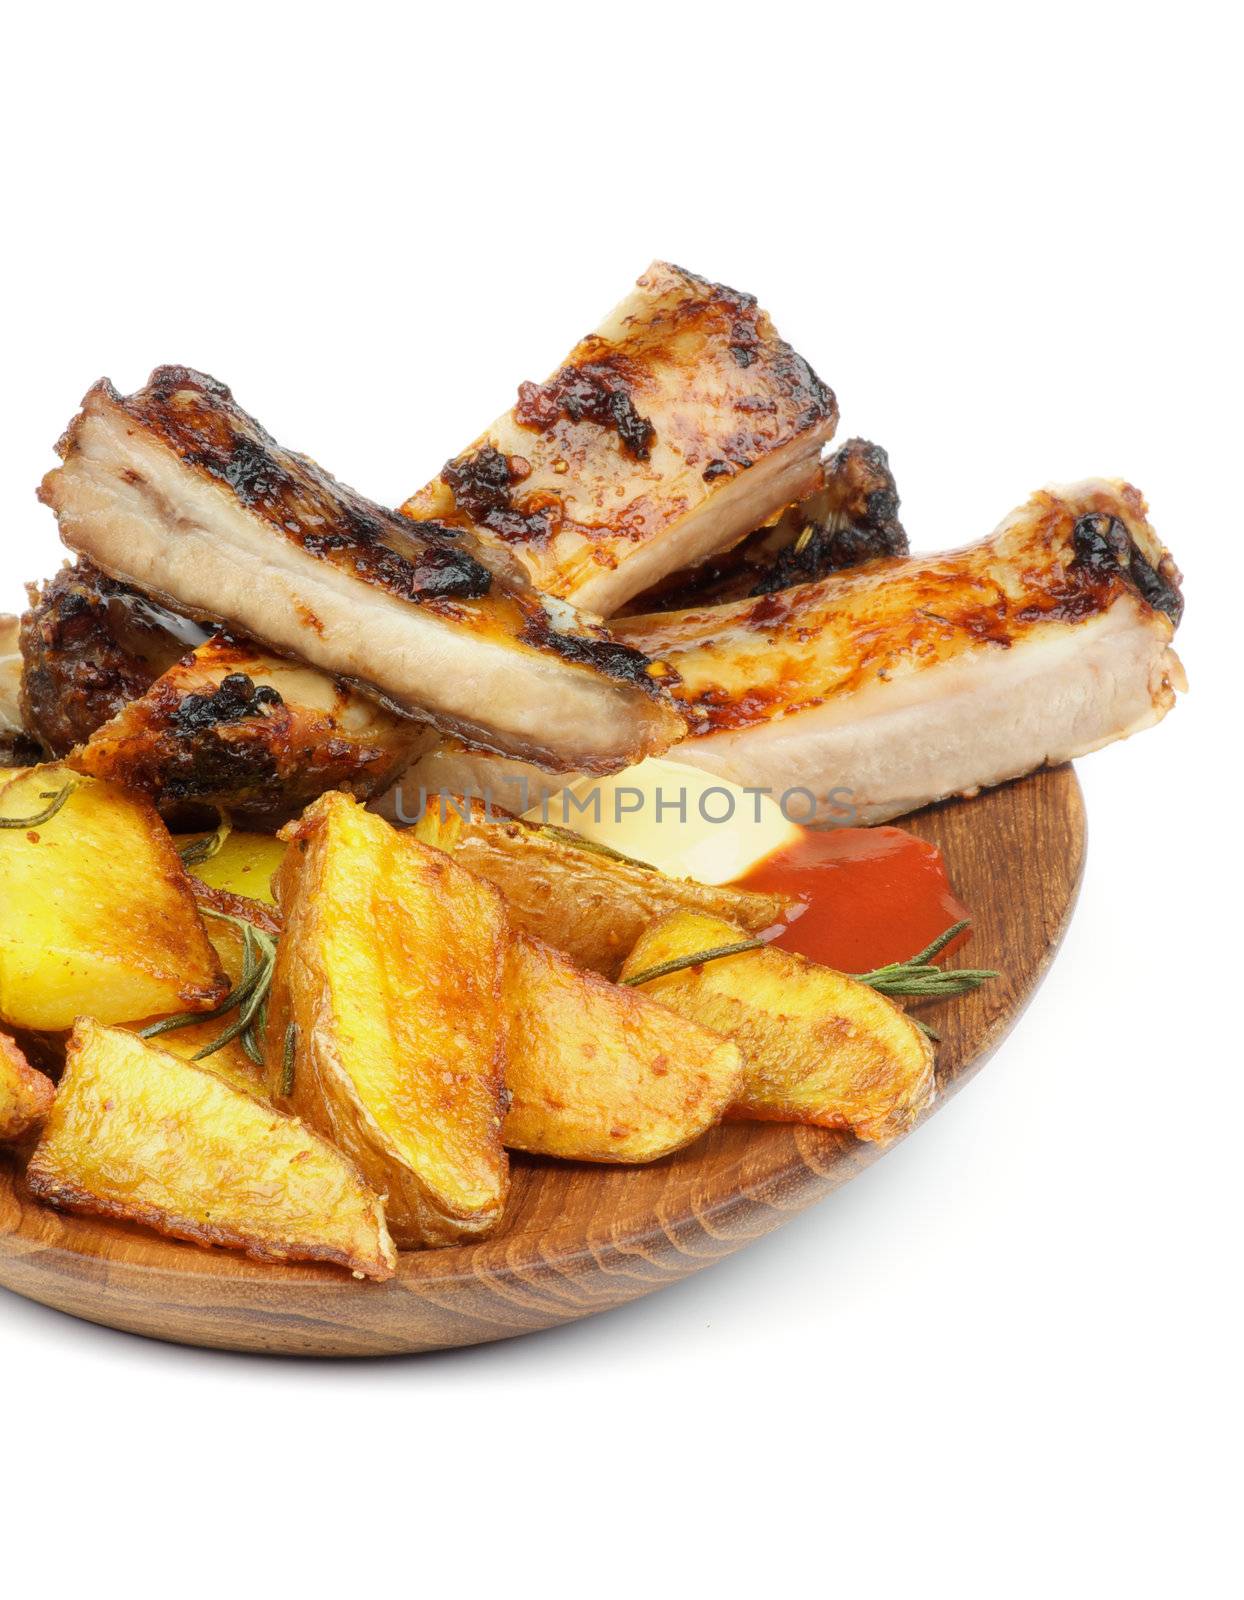 Barbecue Pork Ribs and Roasted Potato Wedges with Ketchup and Cheese Sauce closeup on Wooden Plate